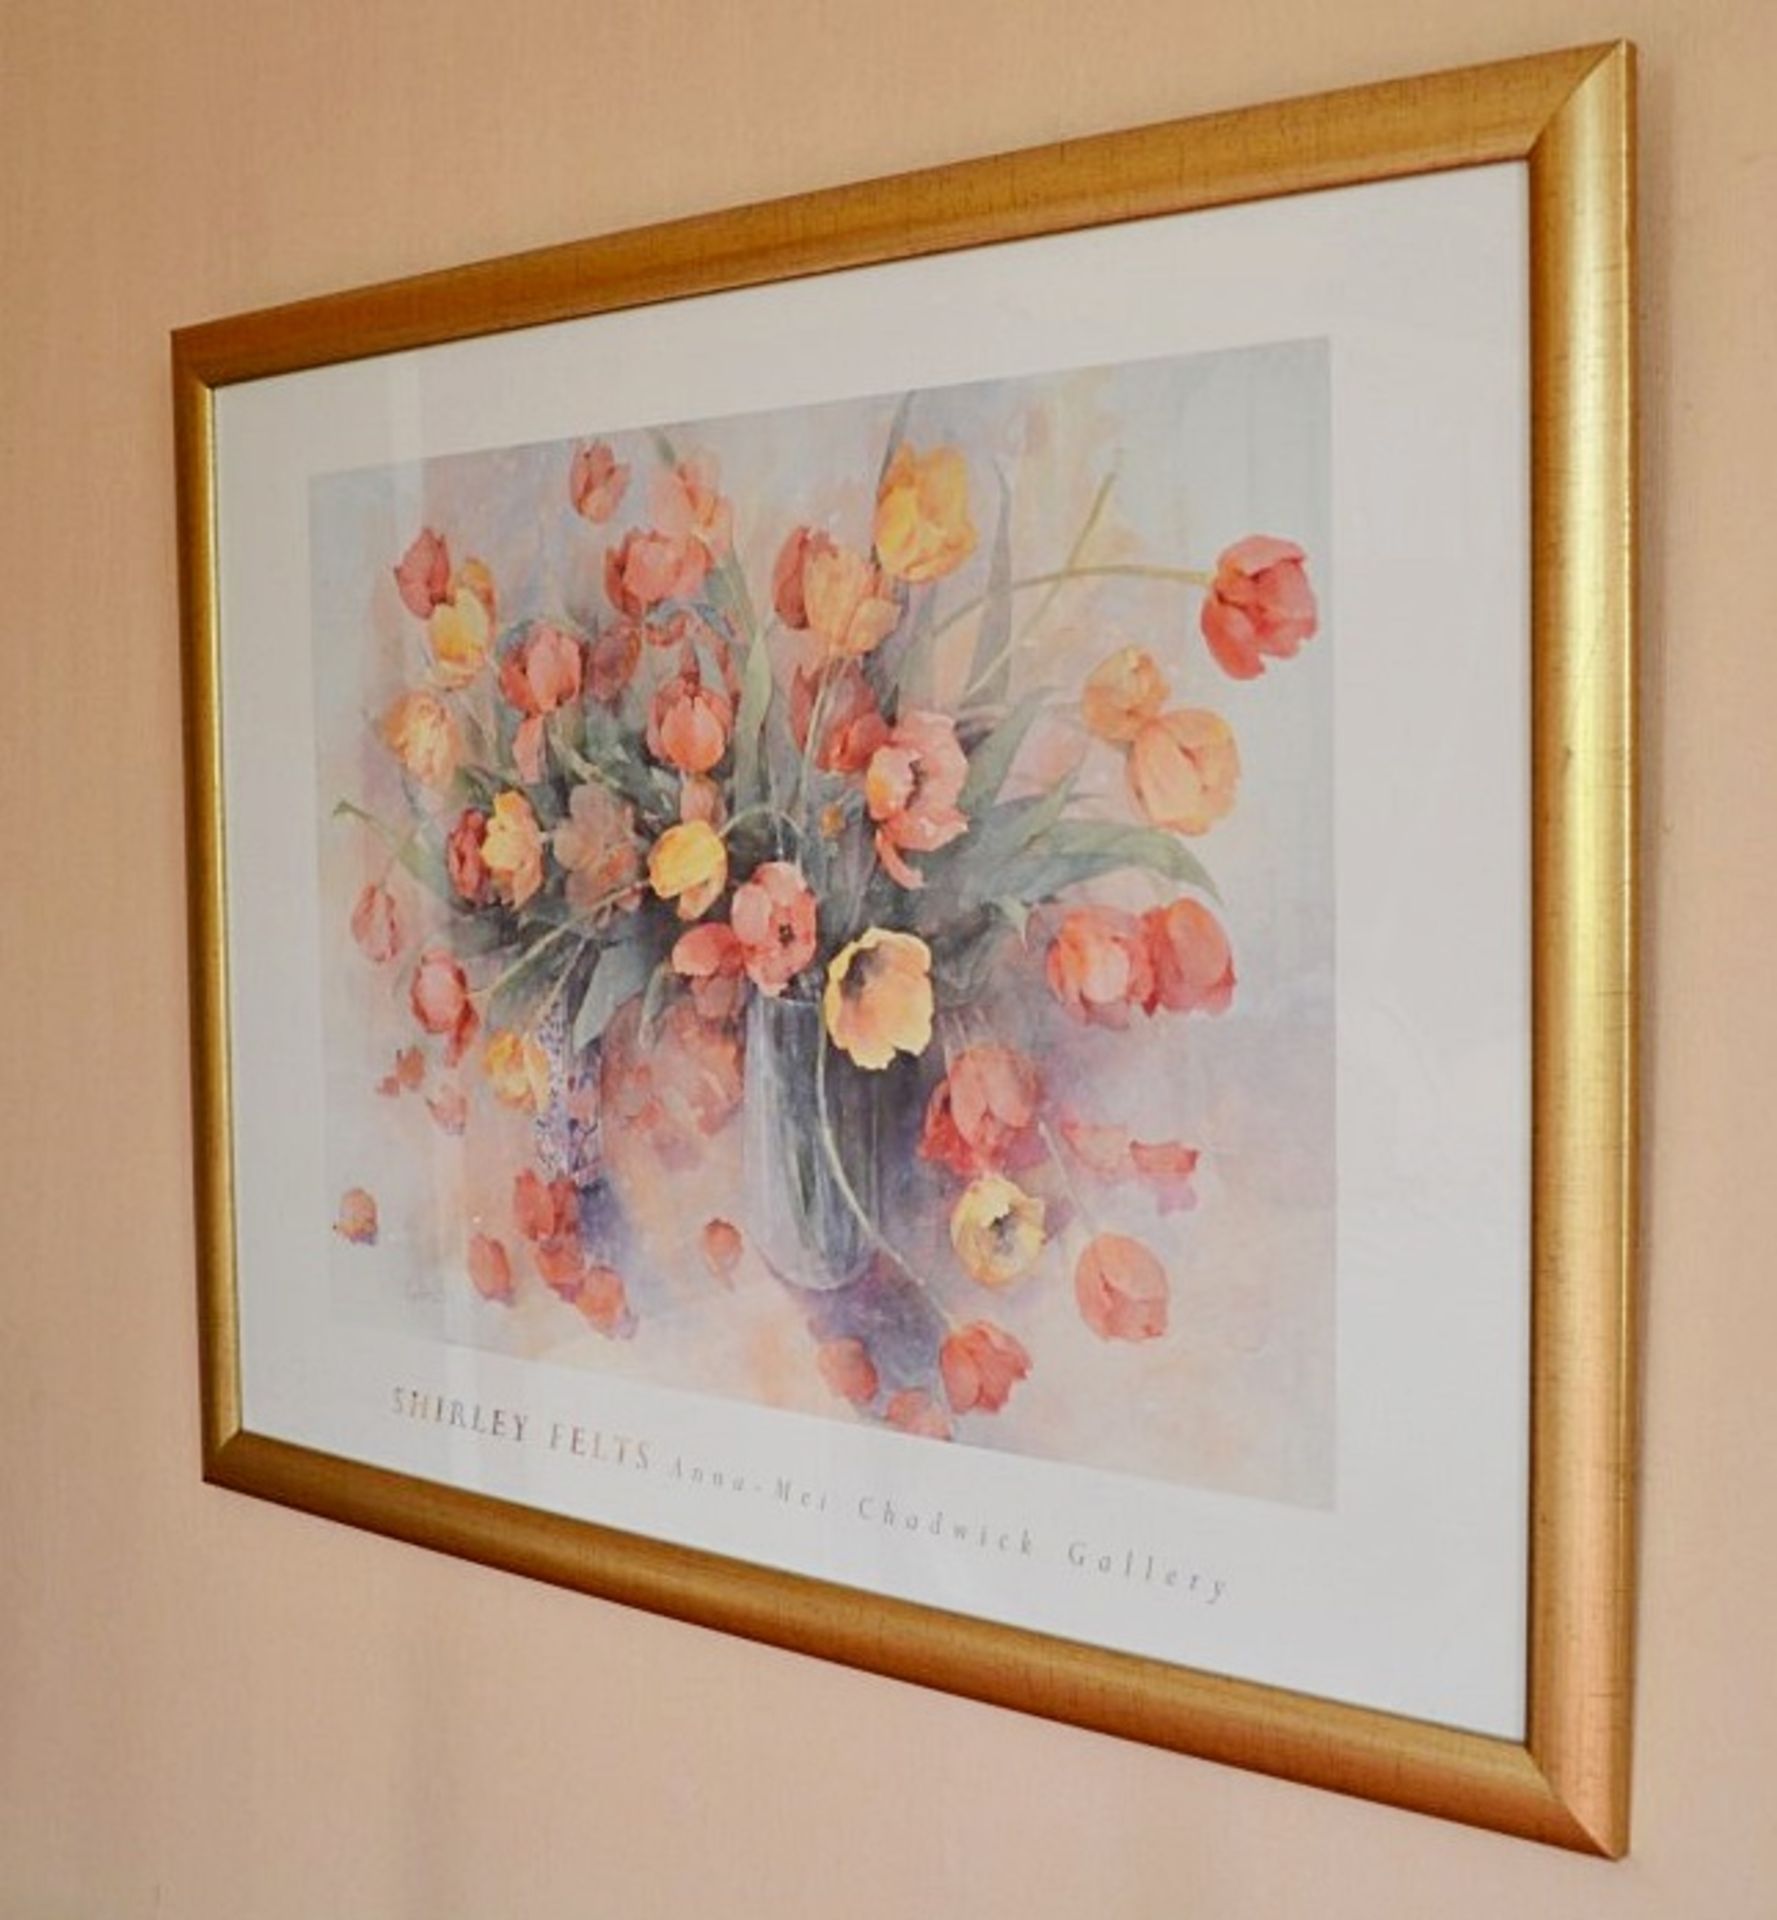 1 x Large Framed Floral Art Print - From A Clean Manor House Environment In Good Condition -